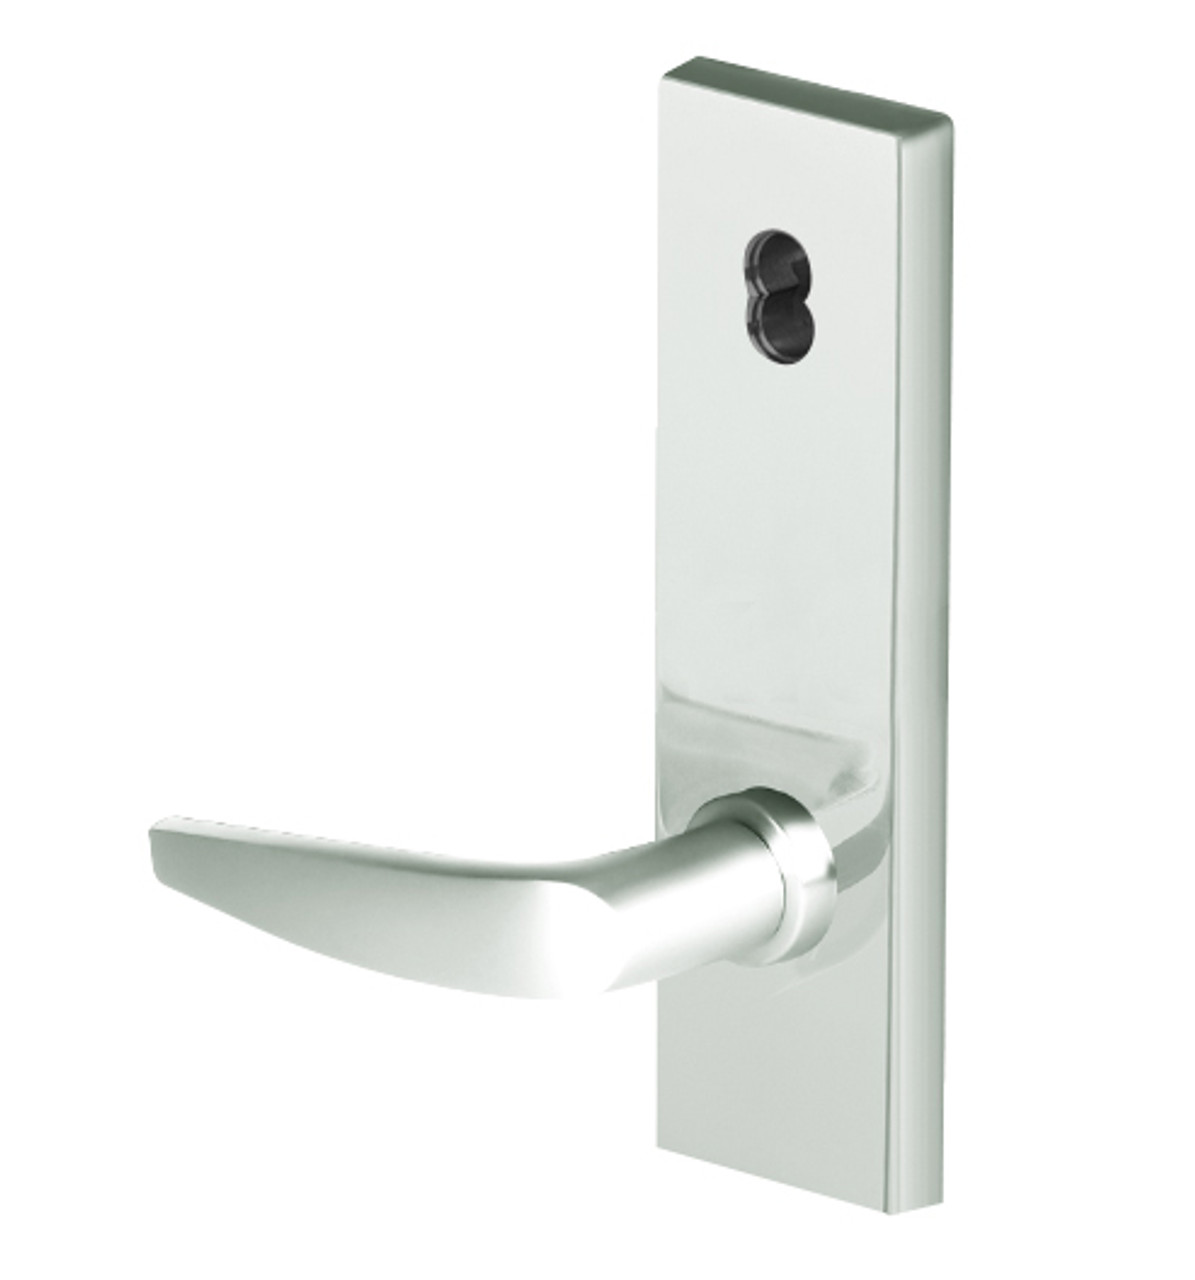 45H7R16N618 Best 40H Series Classroom Heavy Duty Mortise Lever Lock with Curved with No Return in Bright Nickel